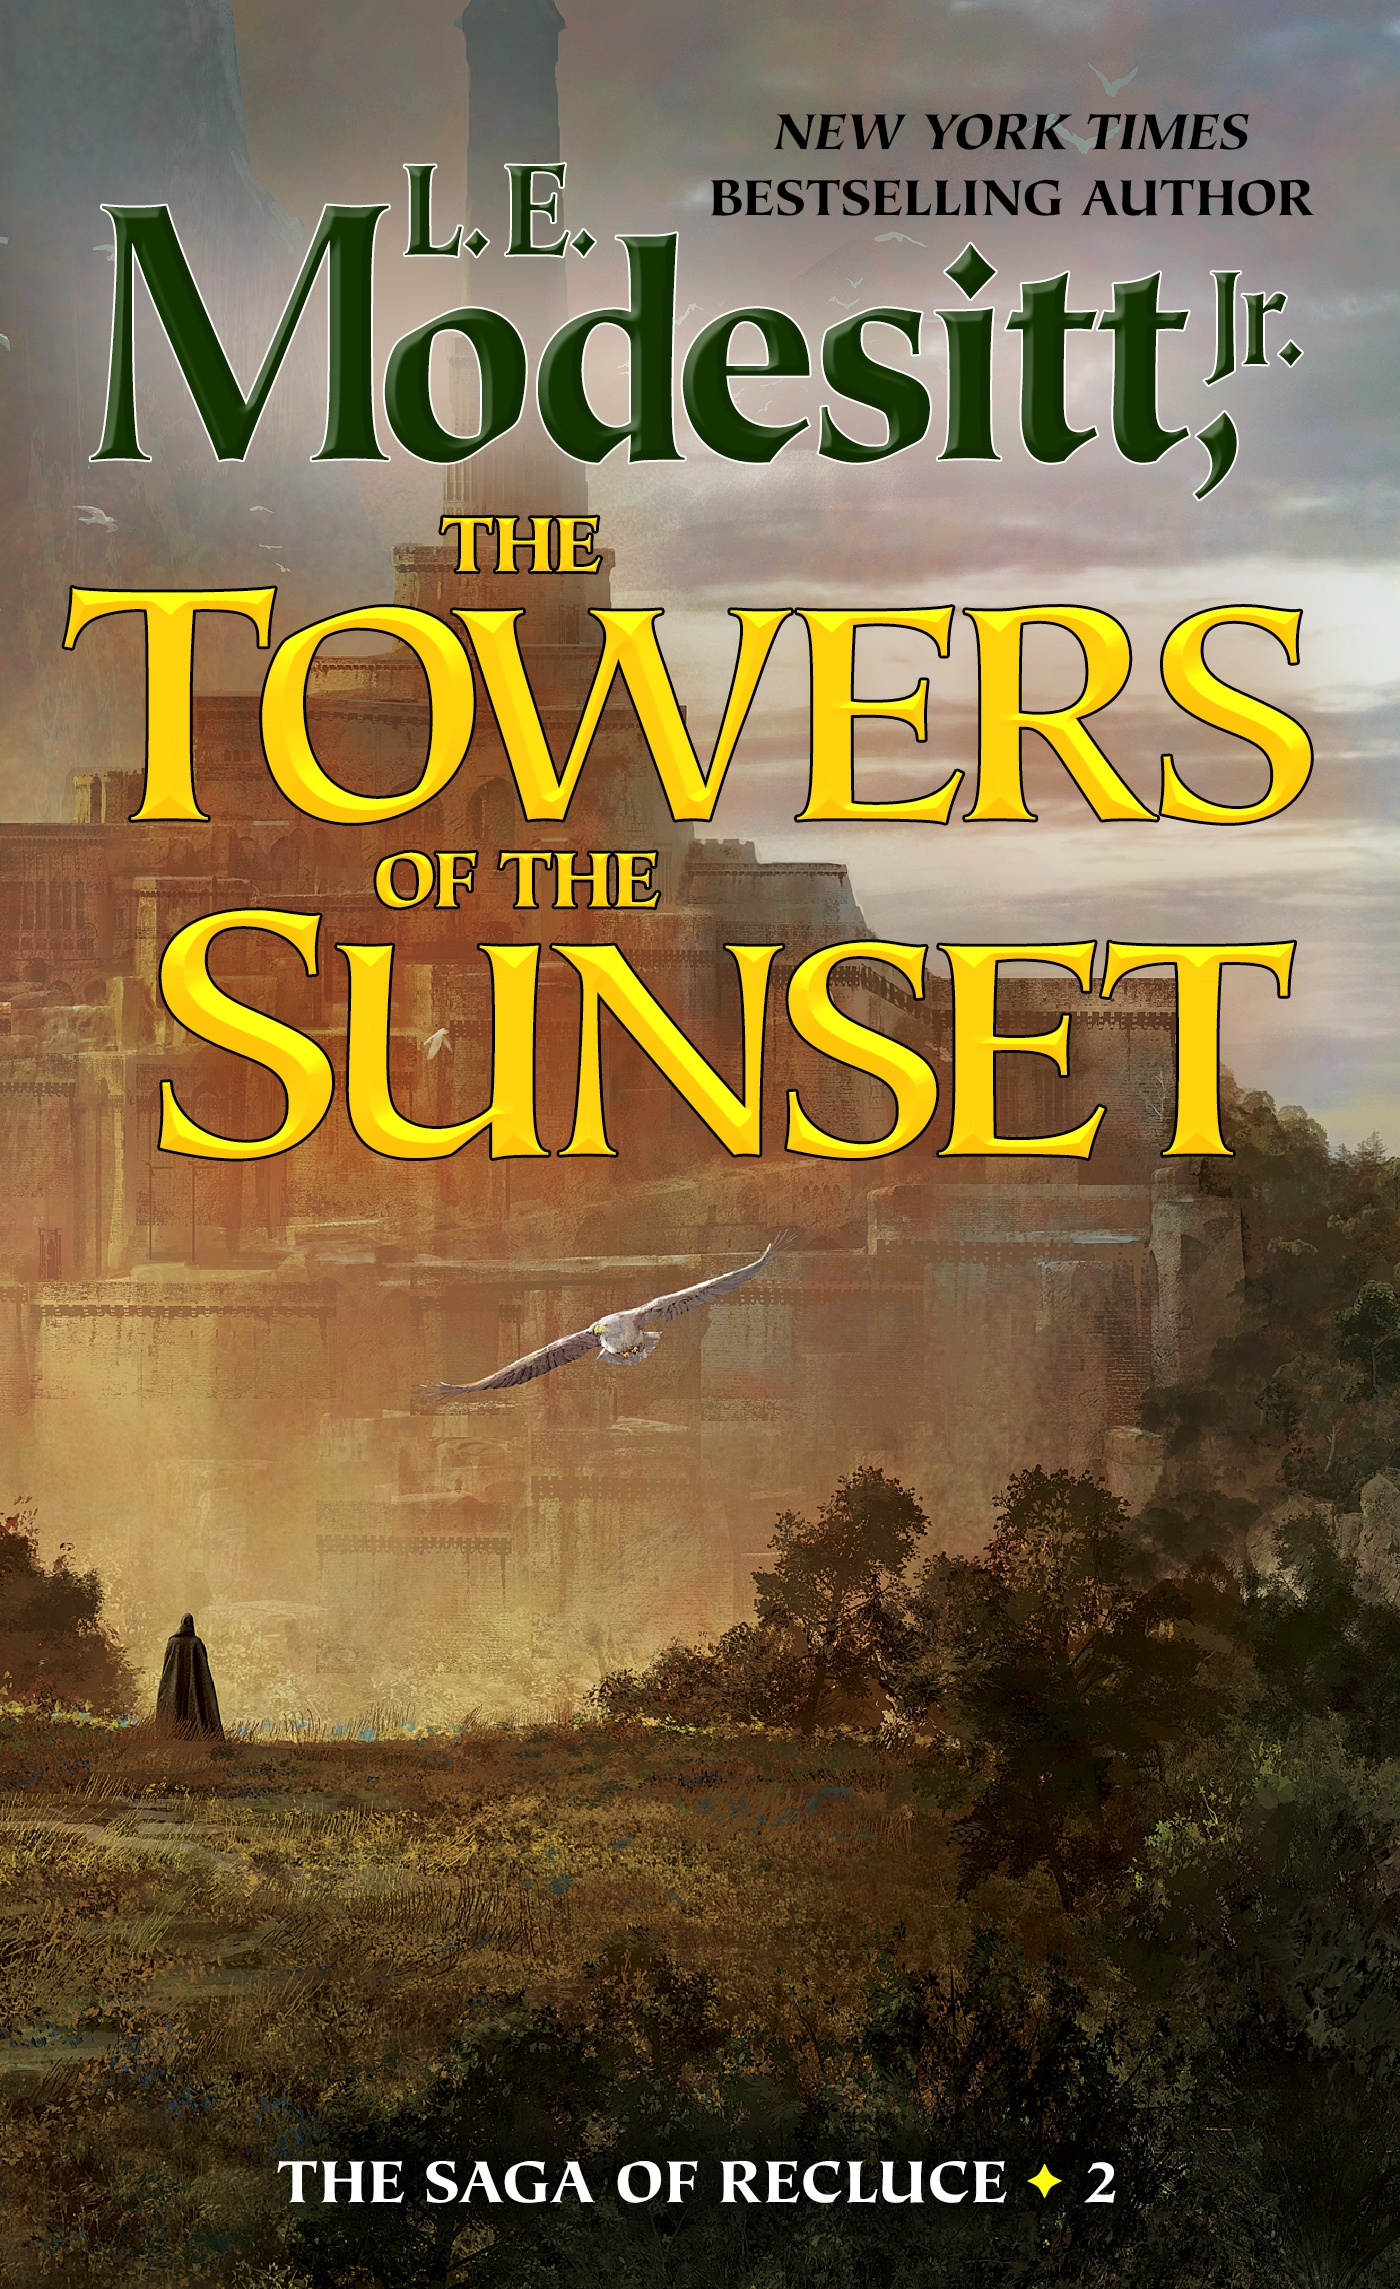 The Towers of the Sunset by L. E. Modesitt, Jr.